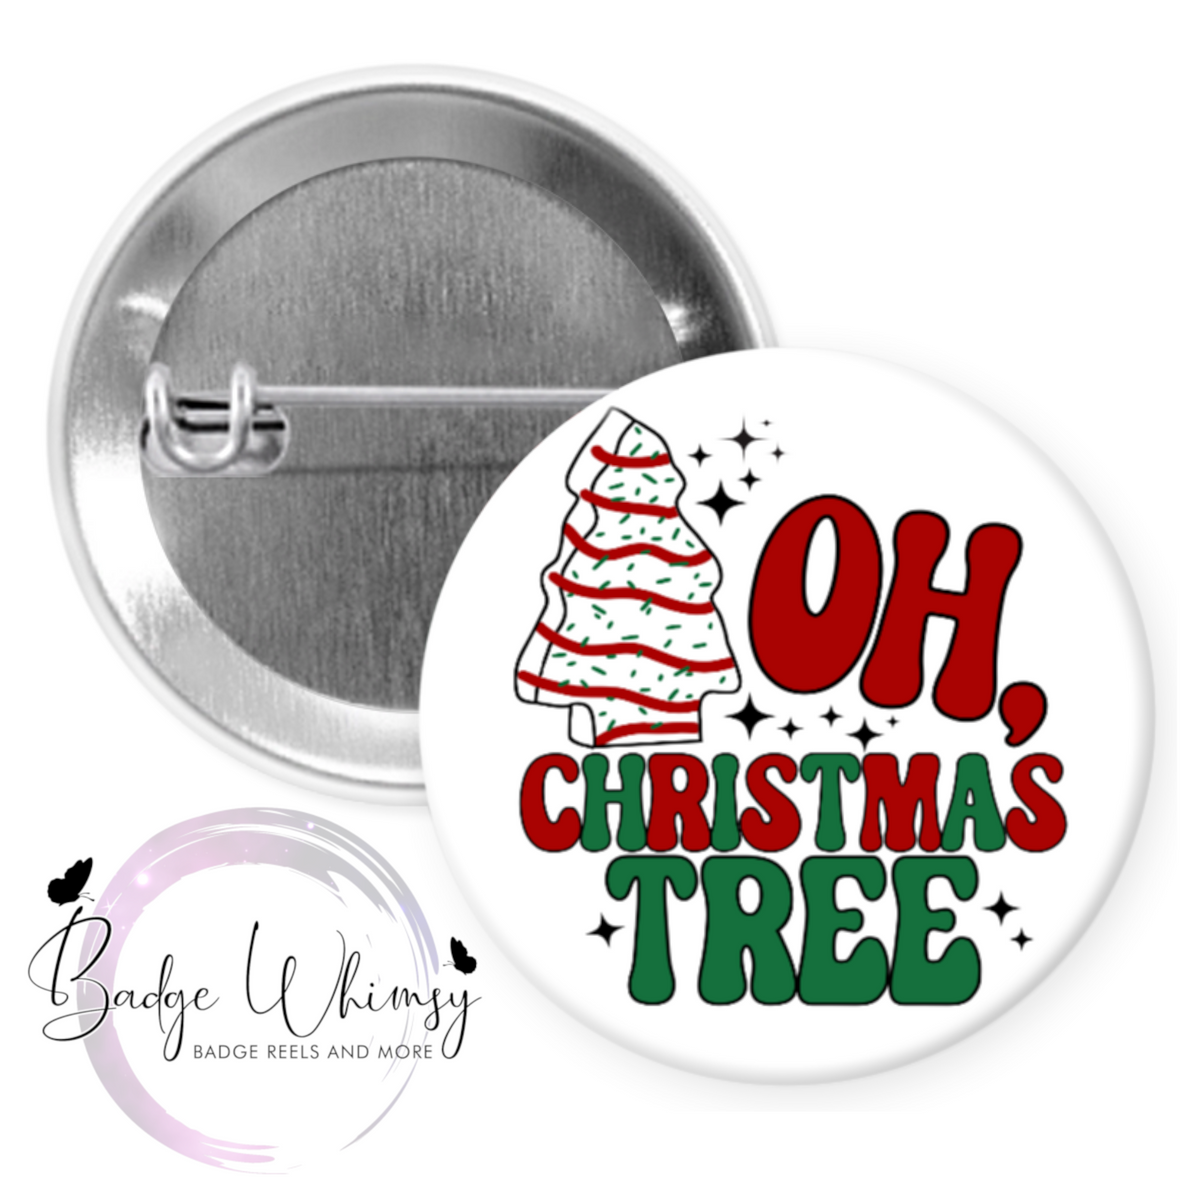 Oh Christmas Tree - Pin, Magnet or Badge Holder